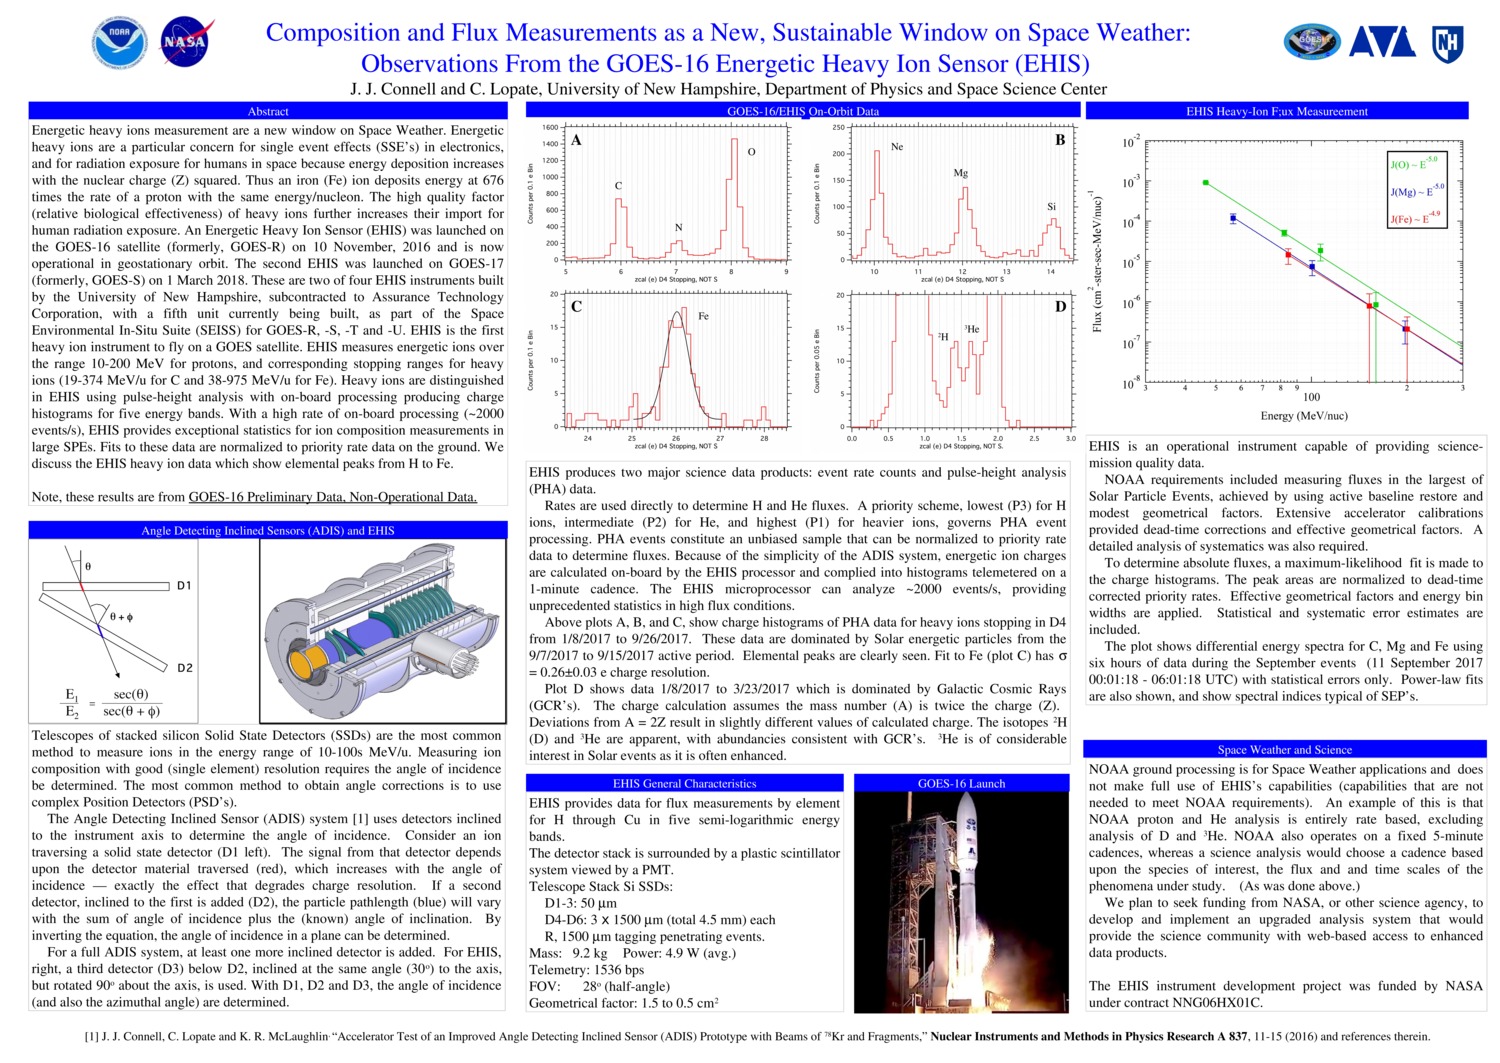 Composition And Flux Measurements As A New, Sustainable Window On Space Weather: Observations From The Goes-16 Energetic Heavy Ion Sensor (Ehis)  by jjconnell